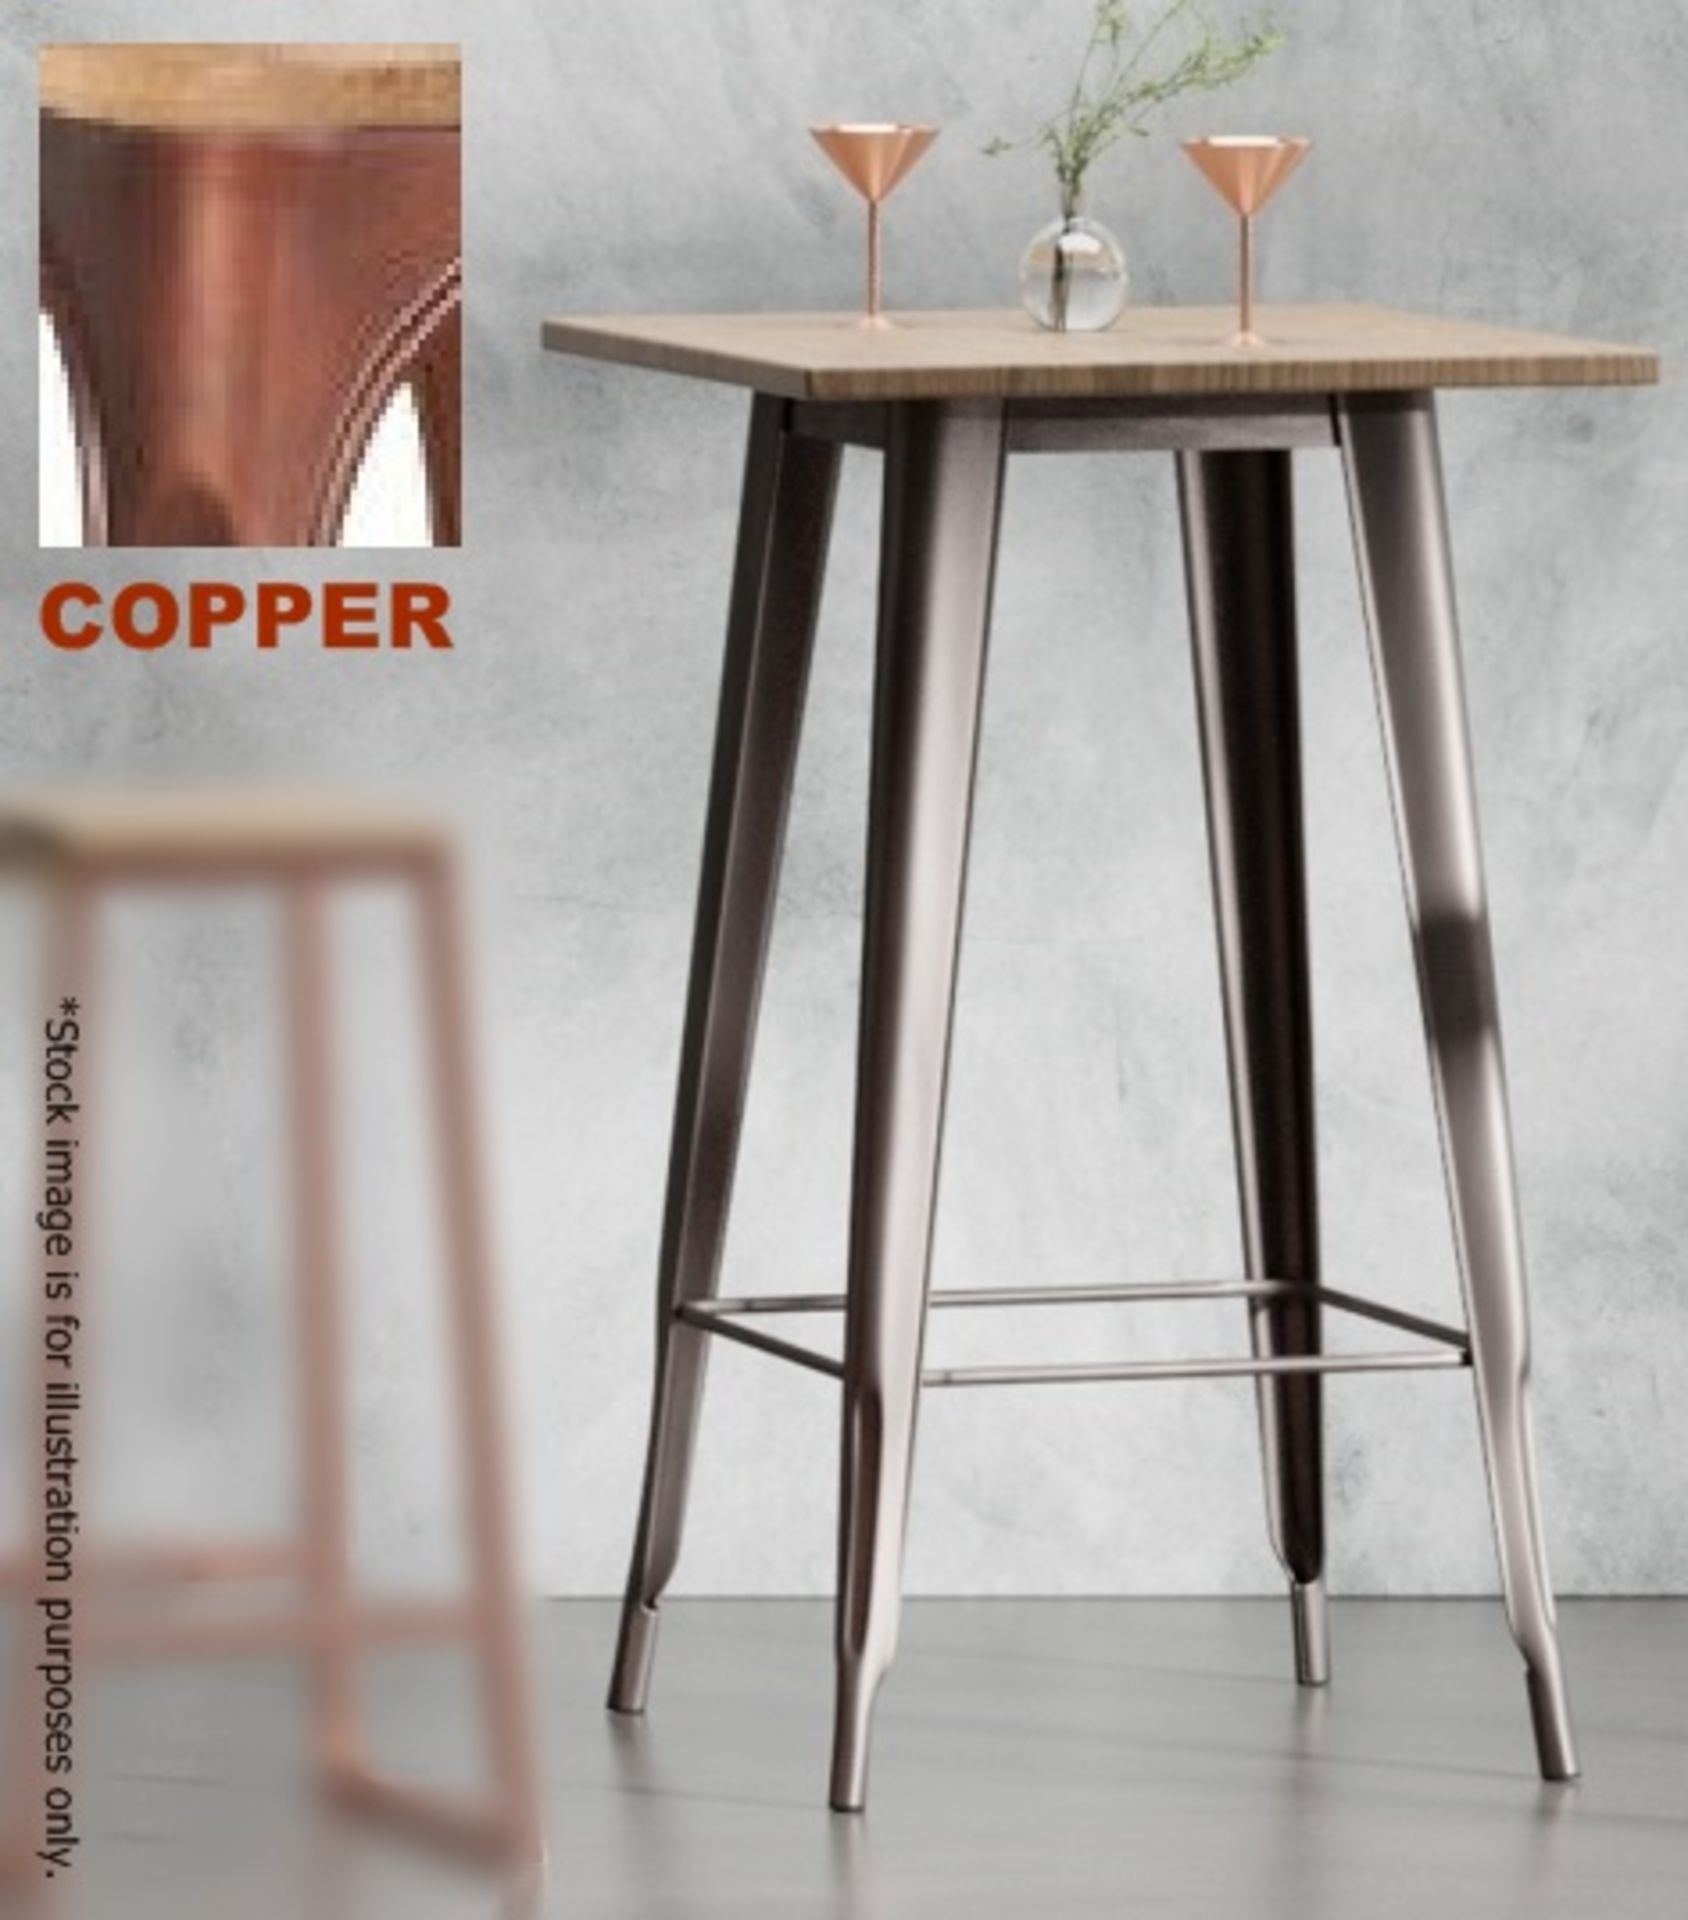 1 x Xavier Pauchard / Tolix Inspired Industrial Metal Bar Table - COPPER With Natural Wood Top